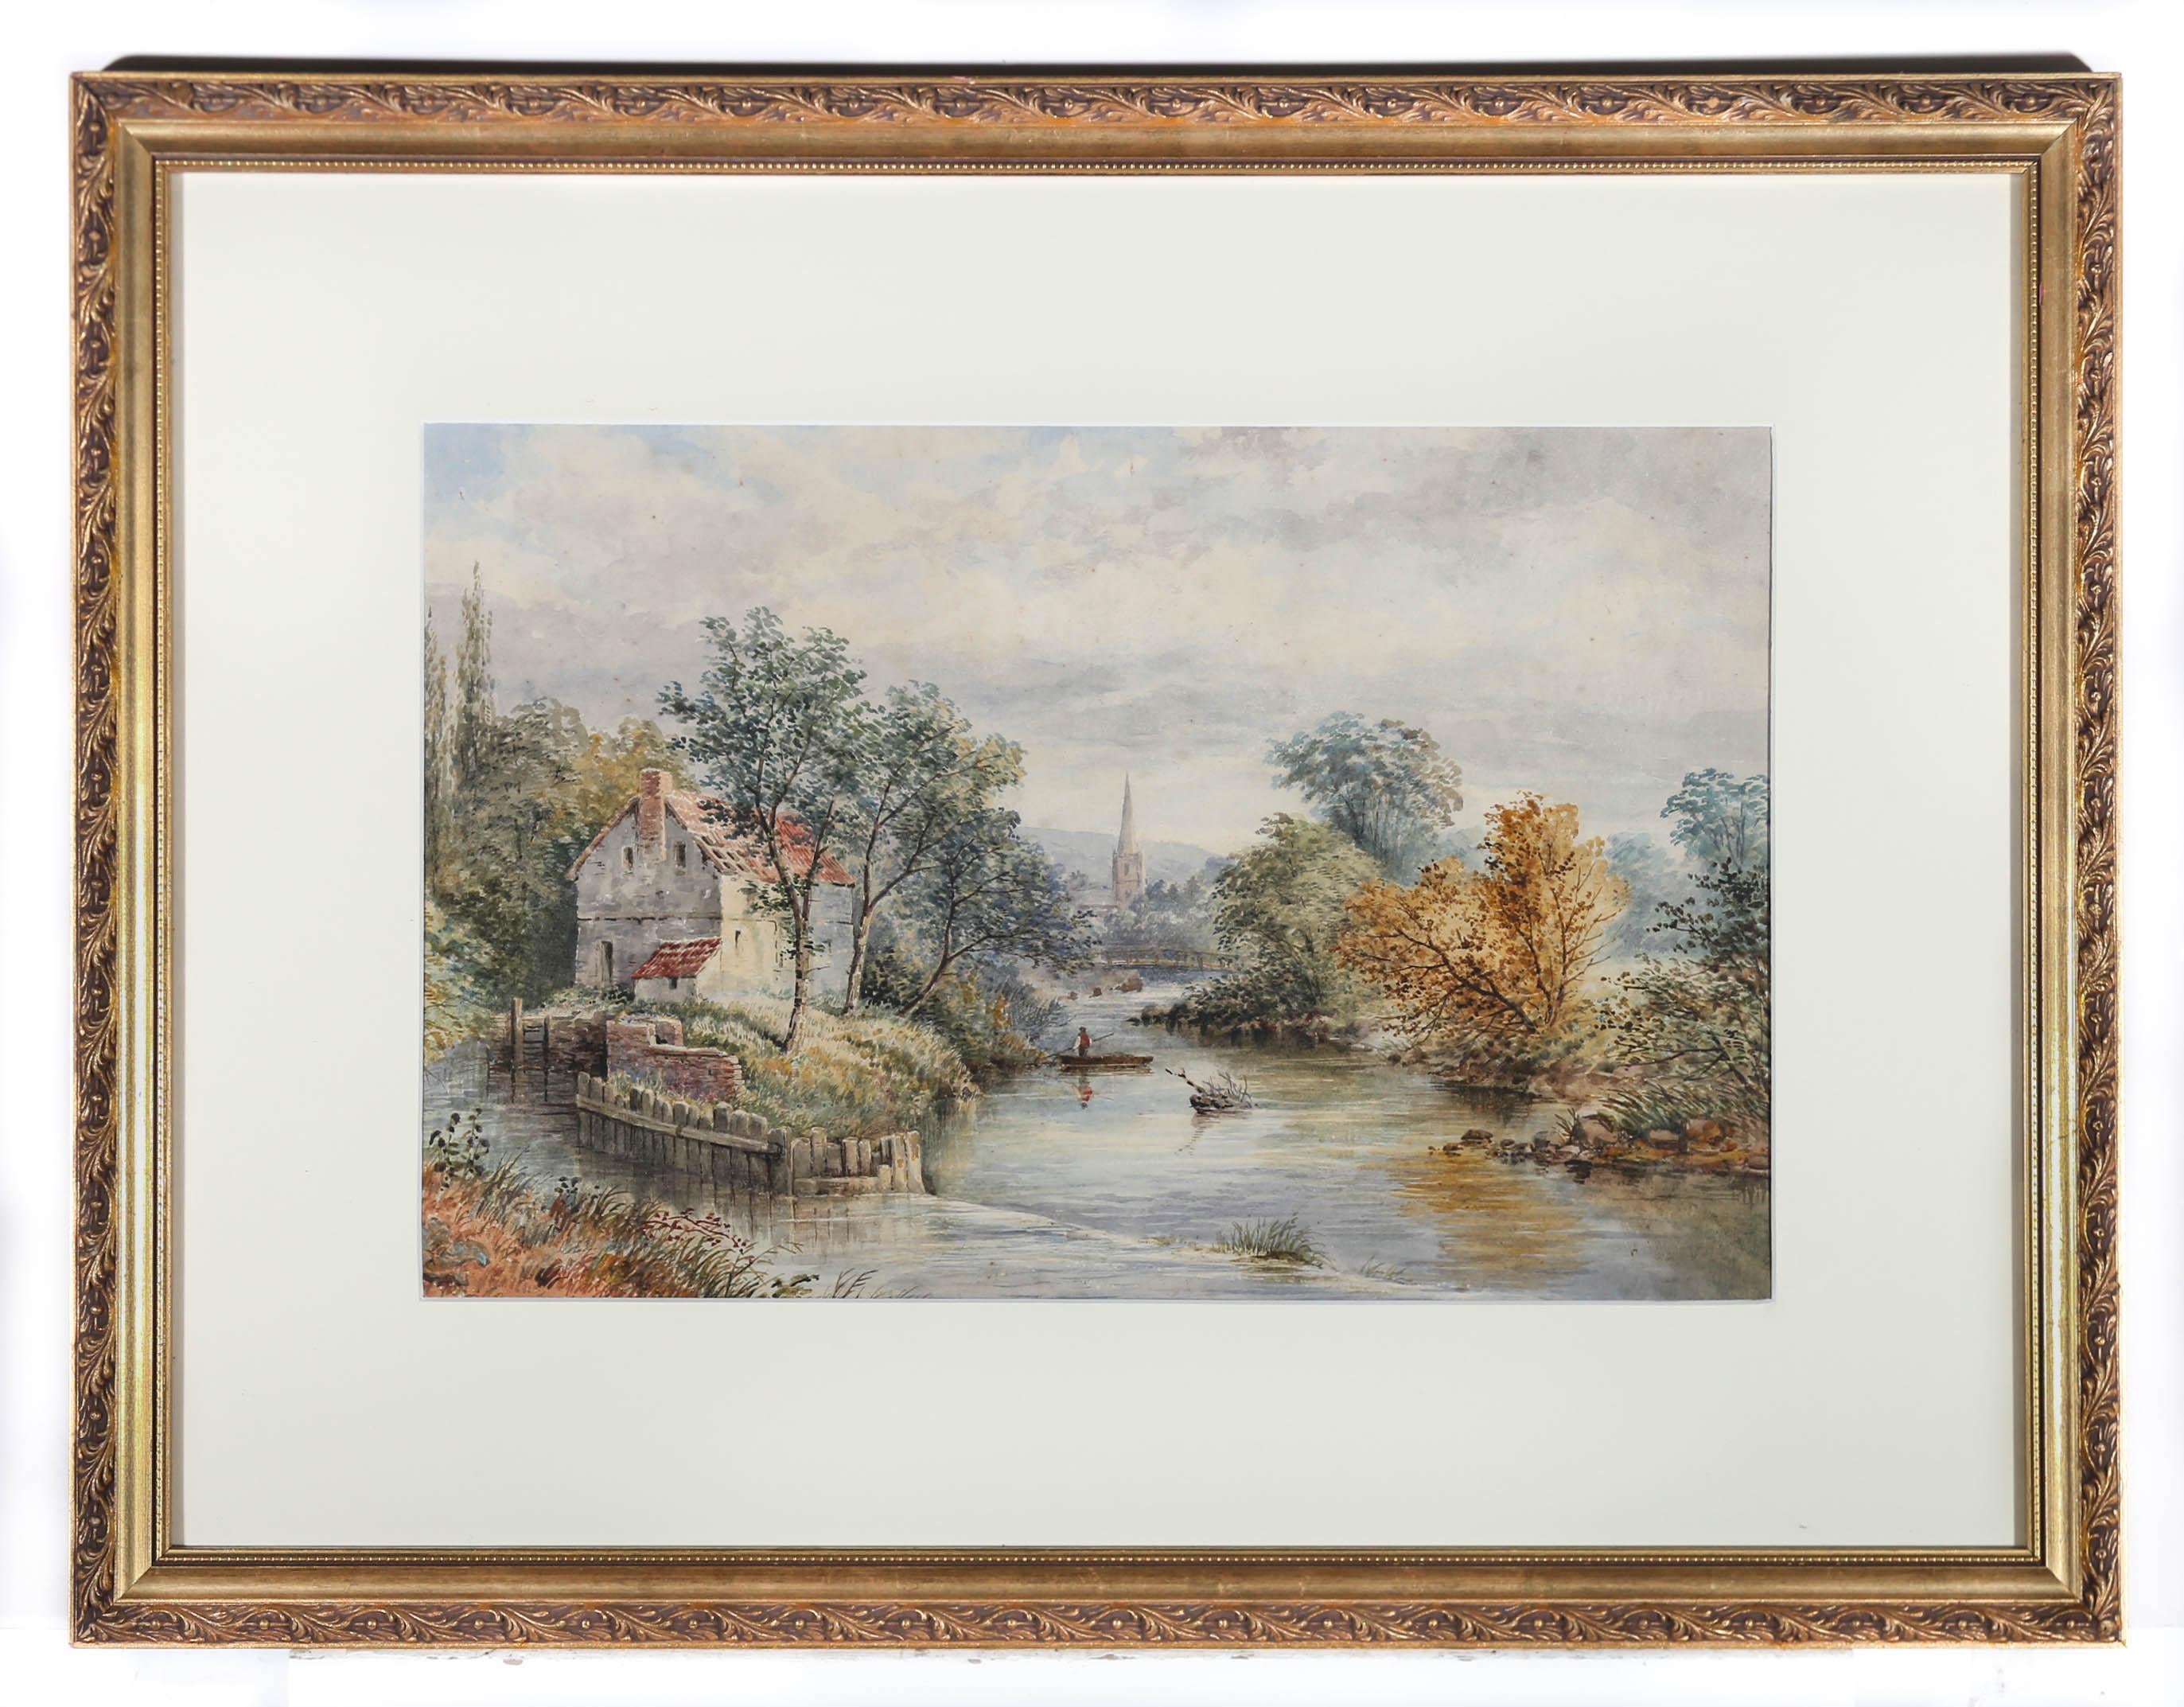 A charming Victorian watercolour landscape, showing a winding river heading towards a distant church steeple. A figure punts a boat along the sparkling water with a rustic dilapidated house sitting on the bank to the left. The water rushes over the